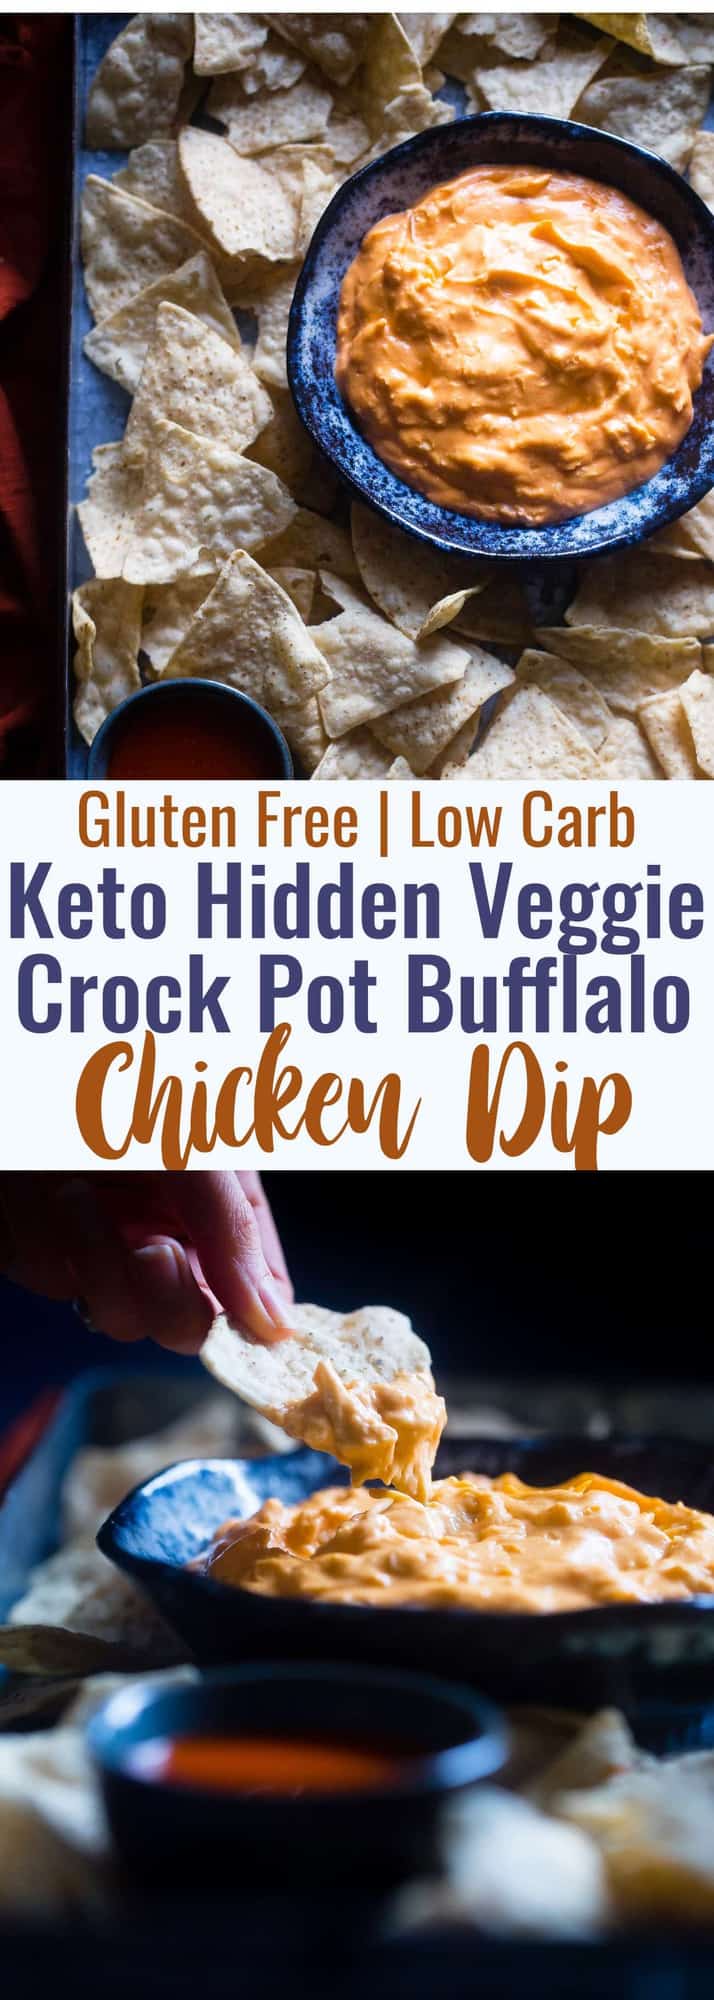 5 Ingredient Crock Pot Healthy Keto Buffalo Chicken Dip with Cauliflower - This dip is made with cauliflower so it's packed with hidden veggies and extra creamy! It's a low carb and gluten free appetizer for game day! | #Foodfaithfitness | #Glutenfree #Keto #lowcarb #healthy #buffalochicken